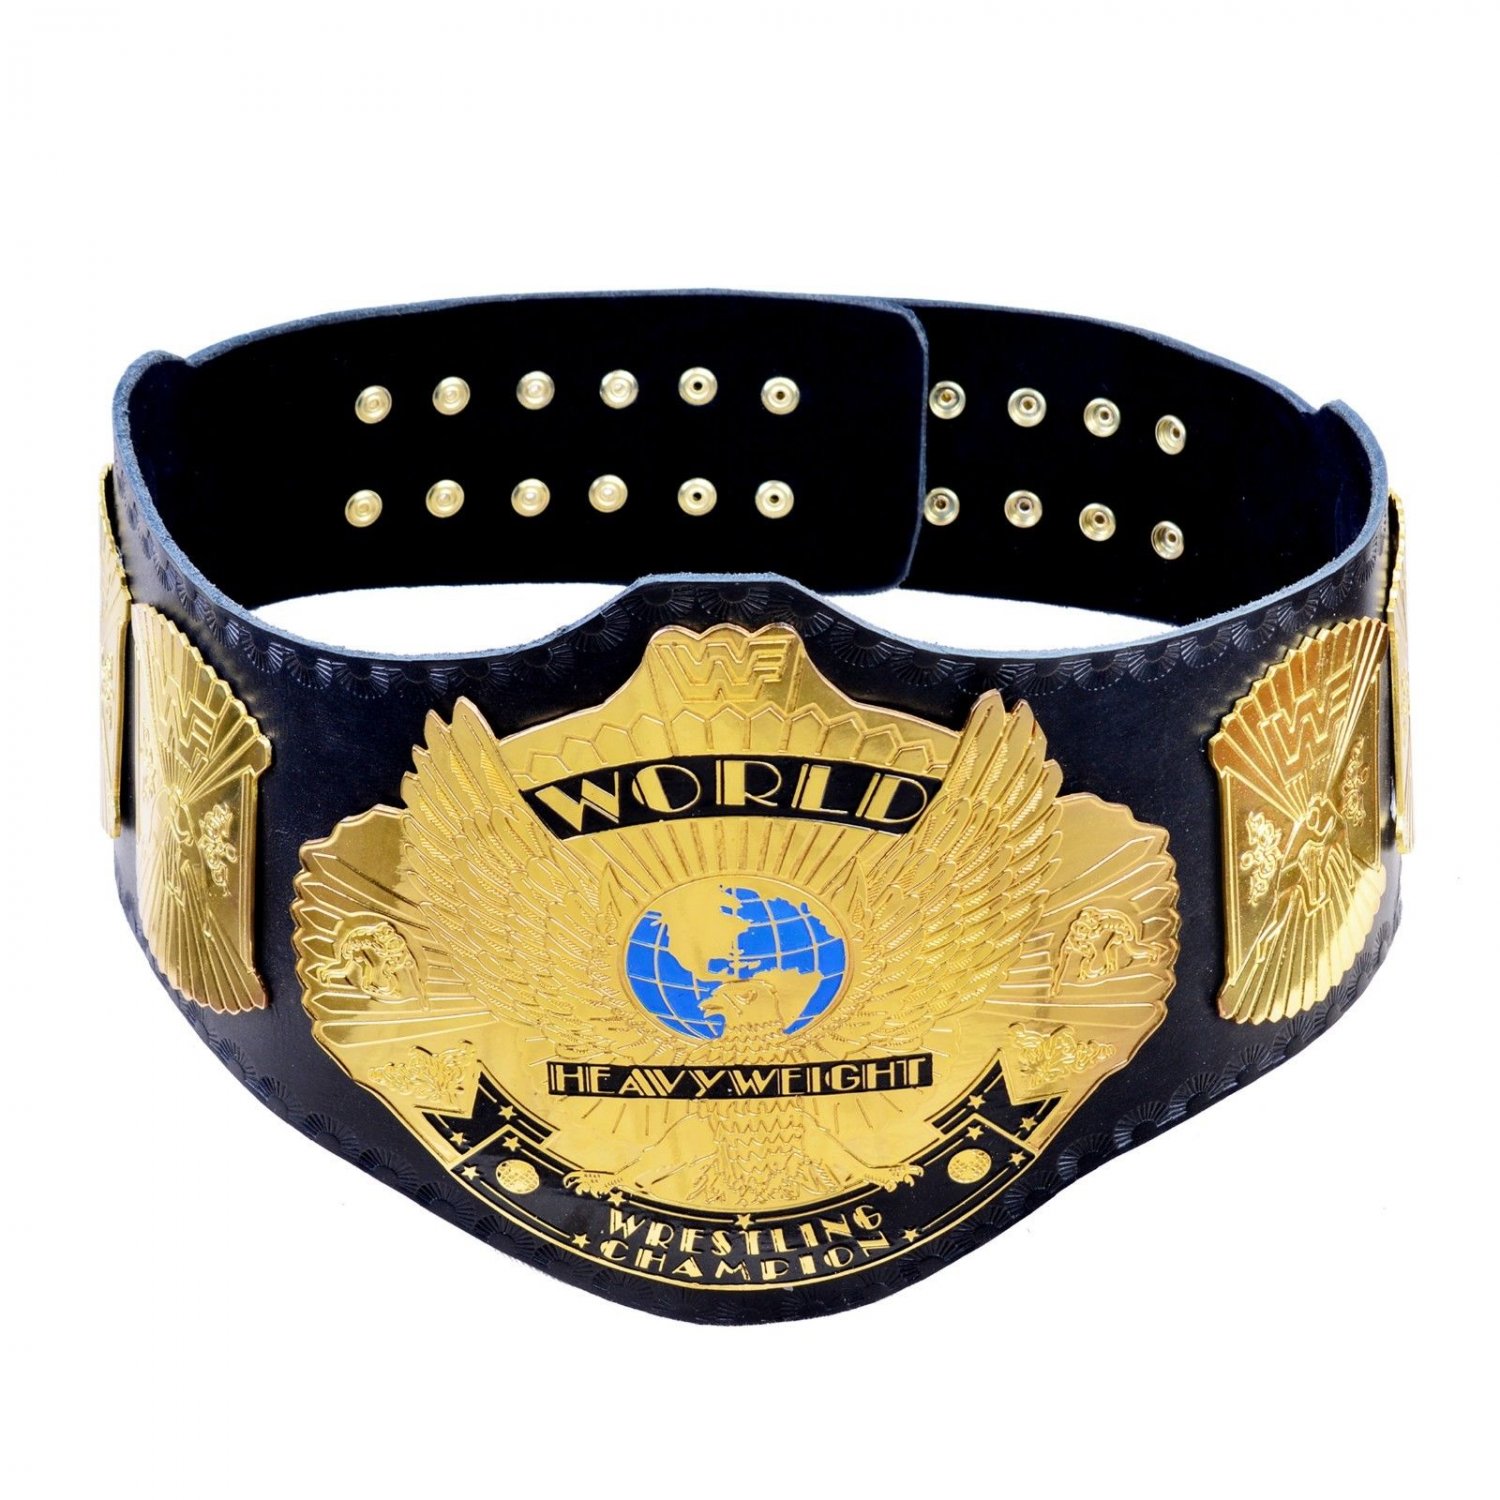 WWF WINGED EAGLE ADULT WRESTLING CHAMPIONSHIP REPLICA BELT THICK METAL ...